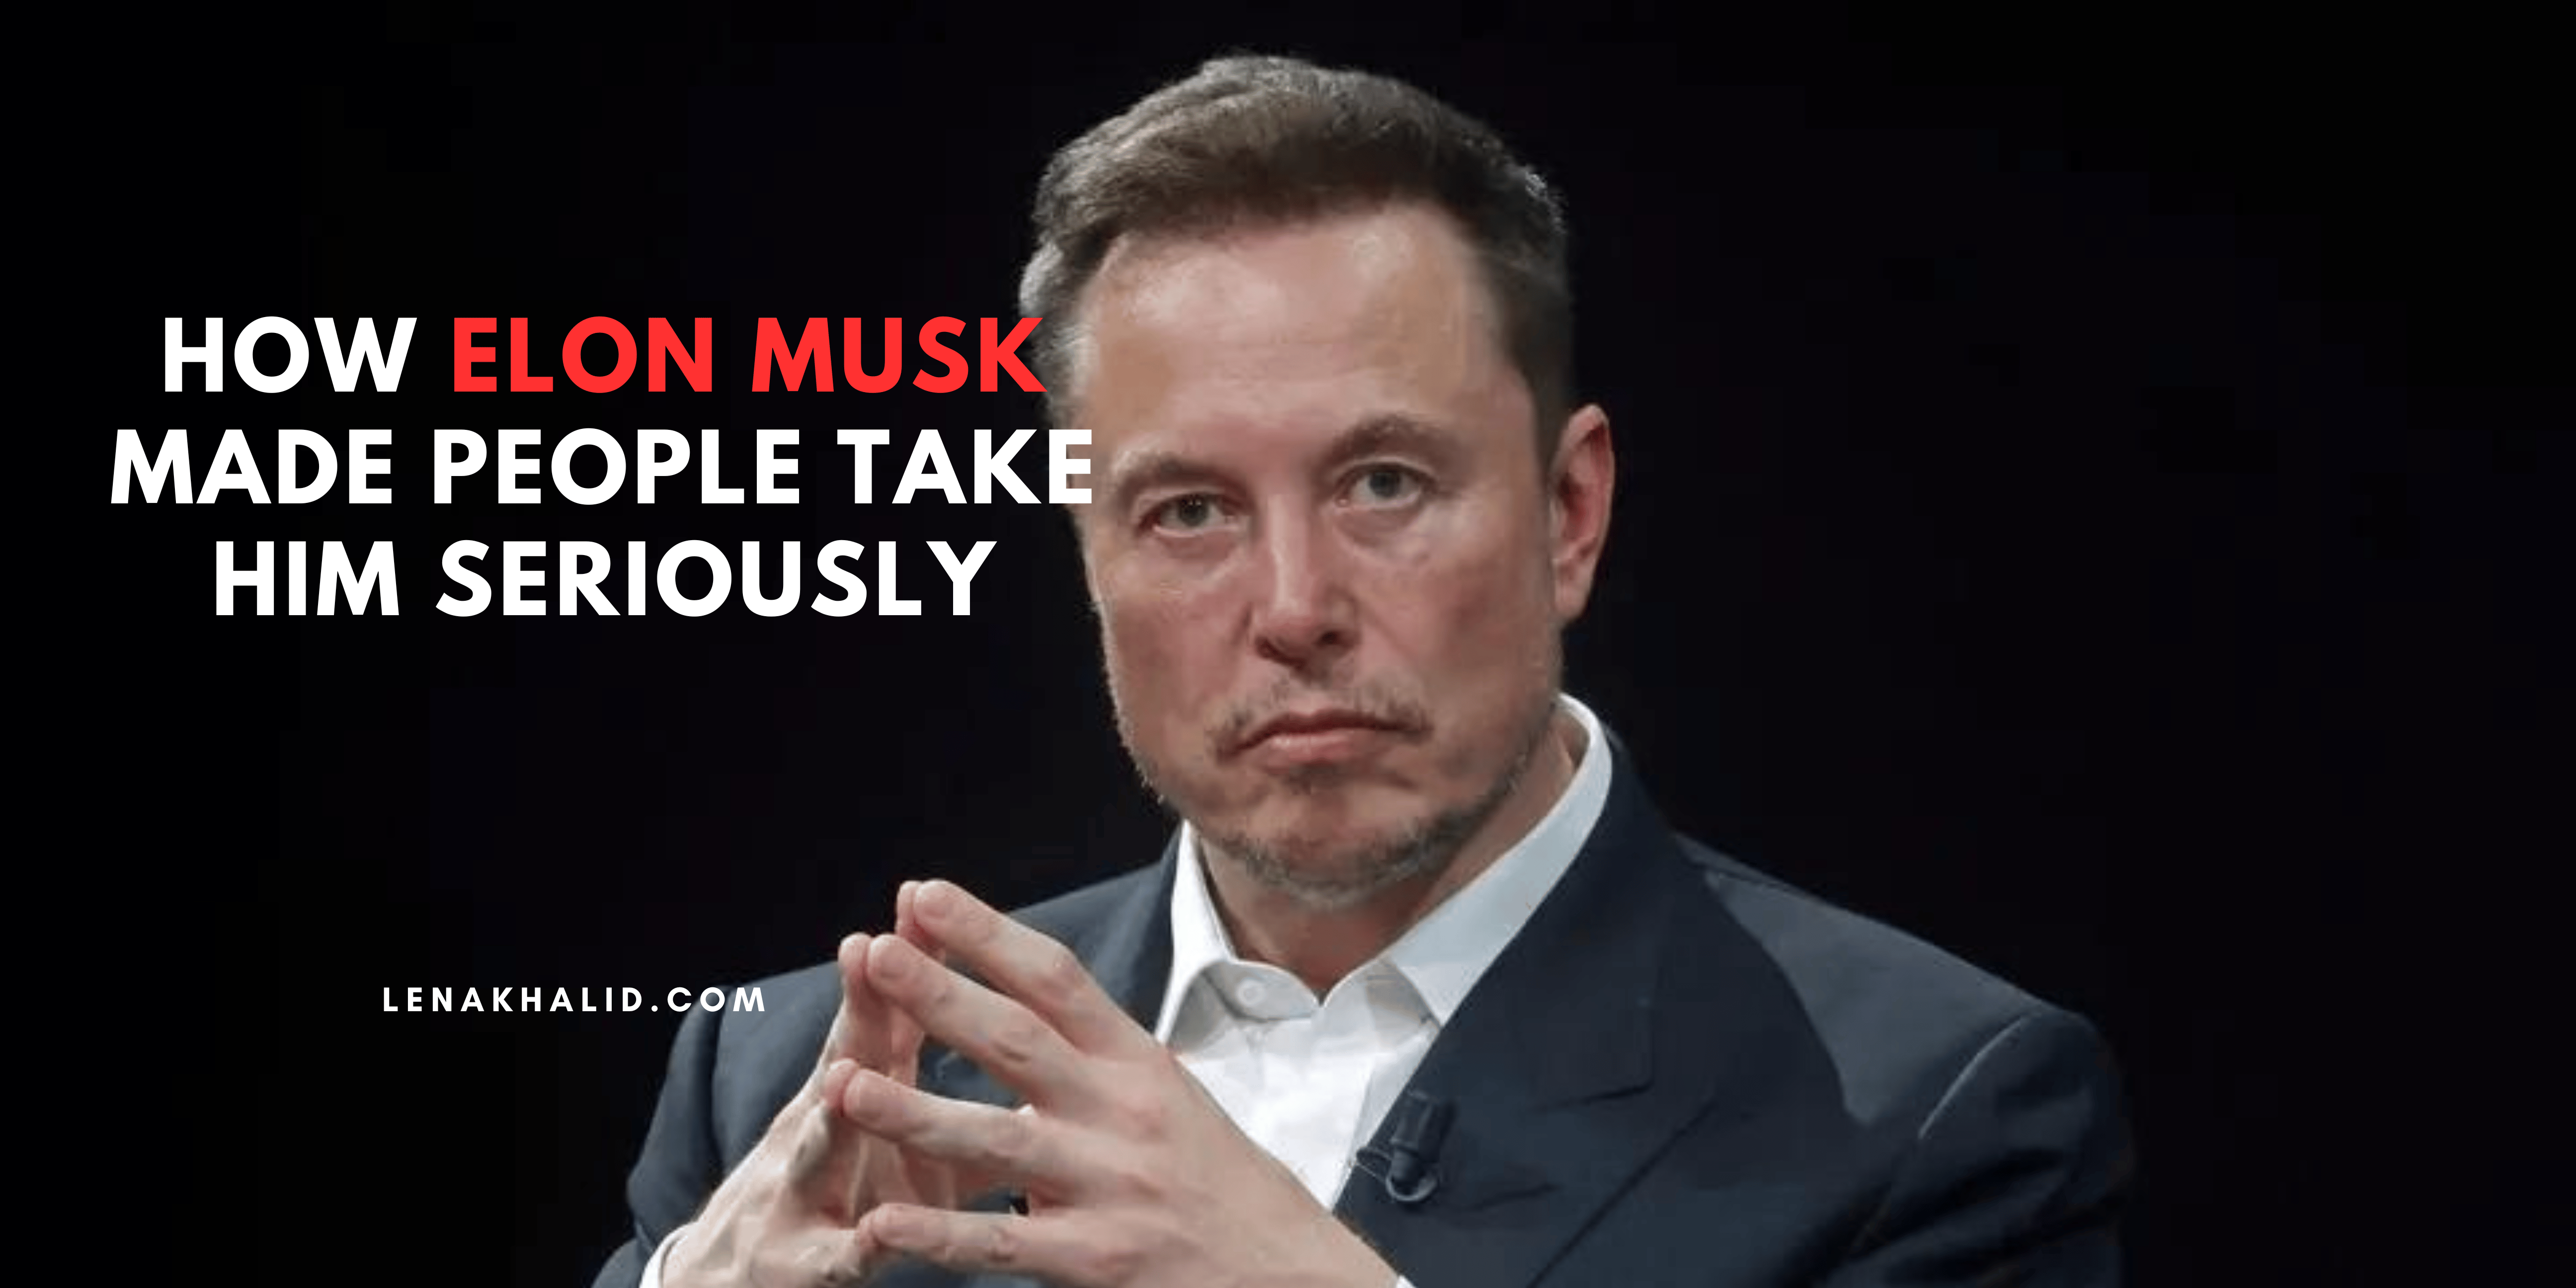 How Elon Musk Made People Take Him Seriously